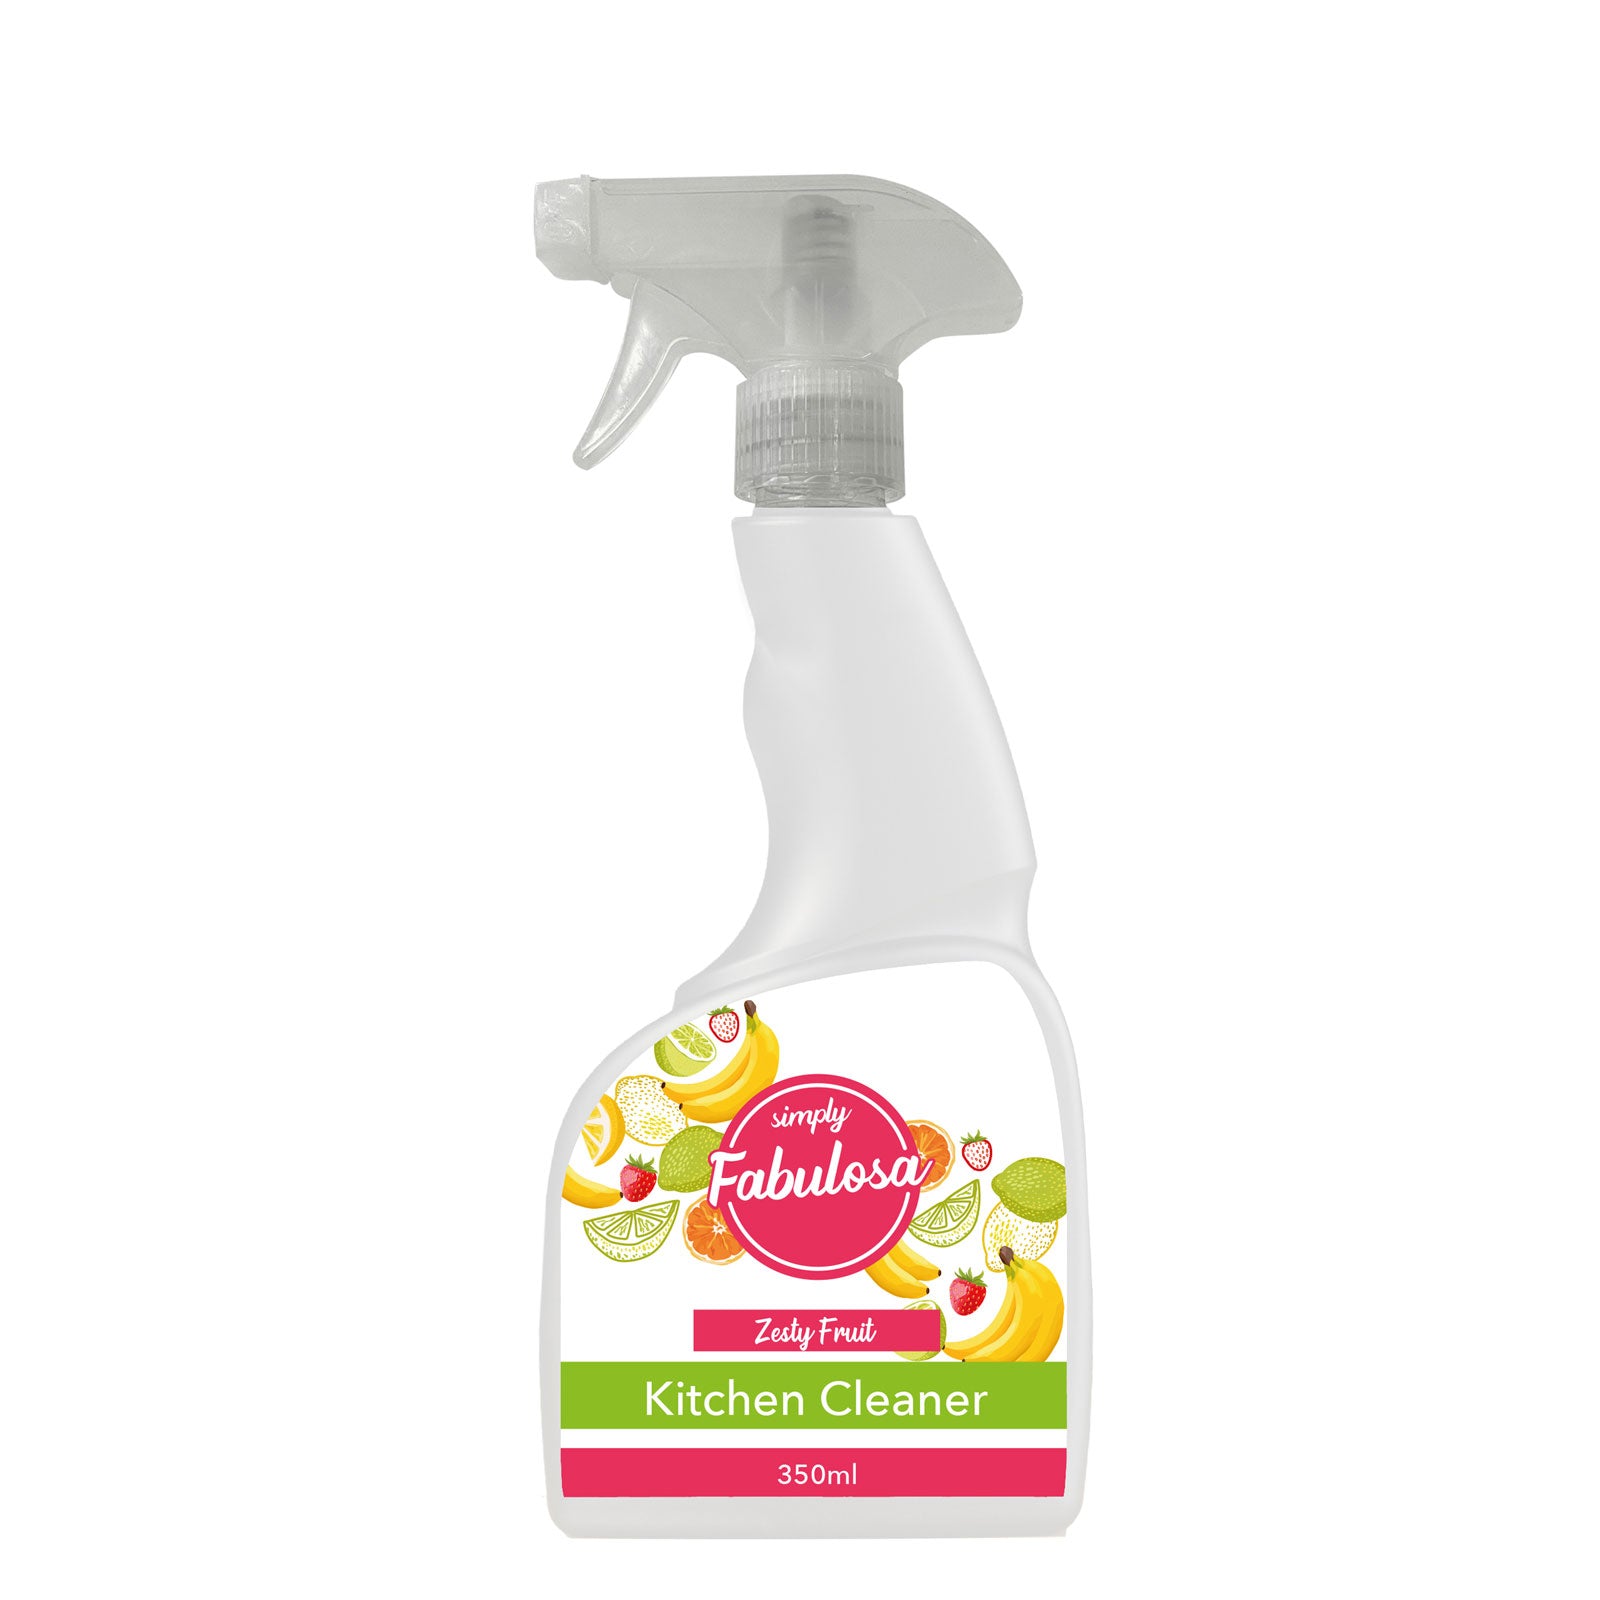 Simply Fabulosa Kitchen Cleaner 350ml – Zesty Fruit